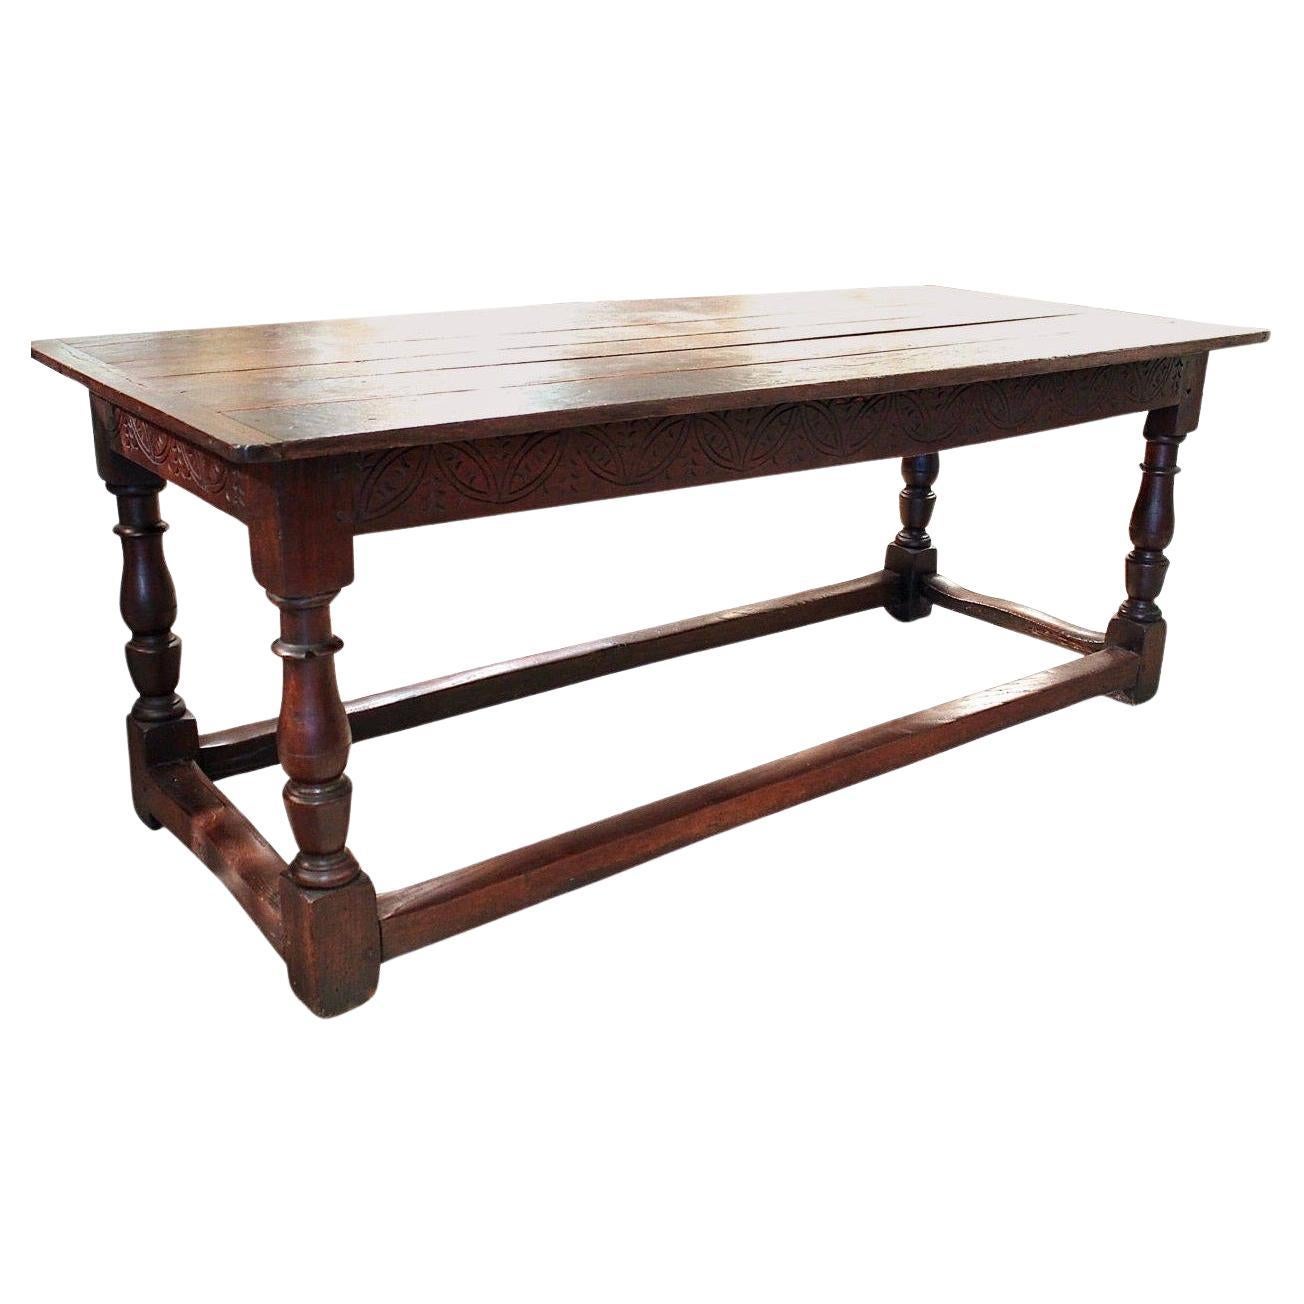 English Oak Refectory Table, Late 17th Century For Sale